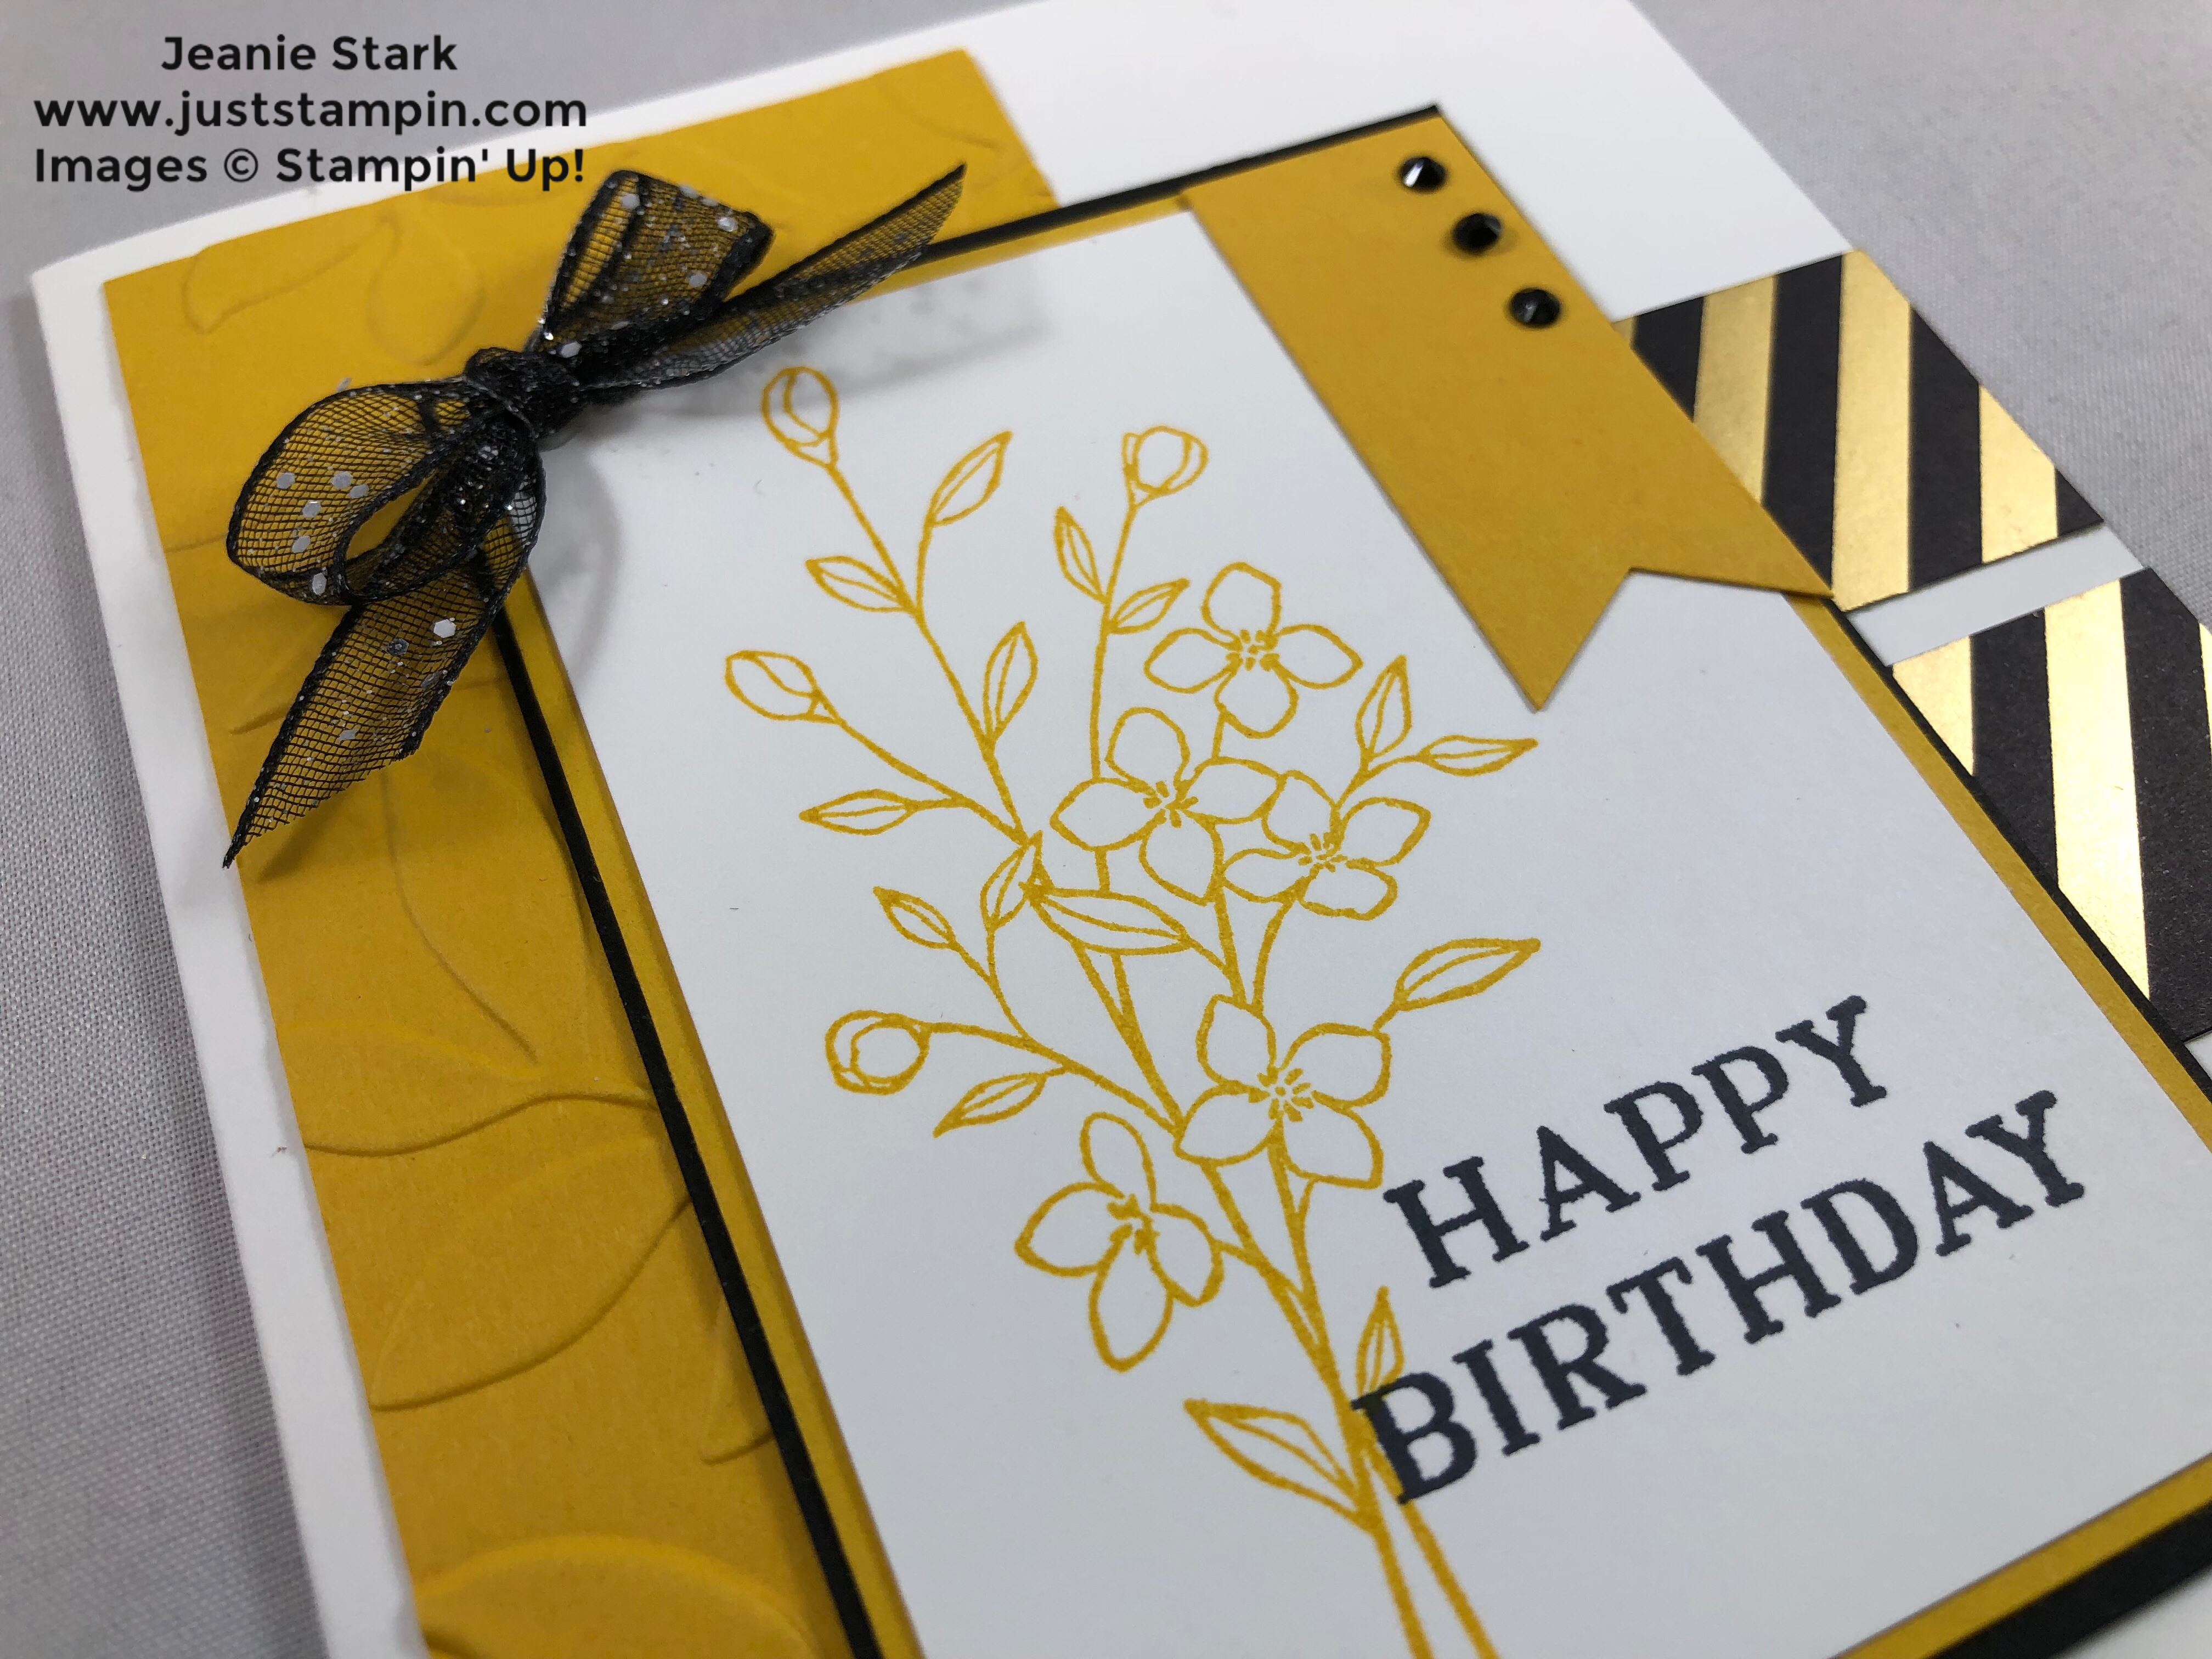 Stampin Up Touches of Texture and Perennial Birthday Layered Leaves embossed Birthday card idea - Jeanie Stark StampinUp